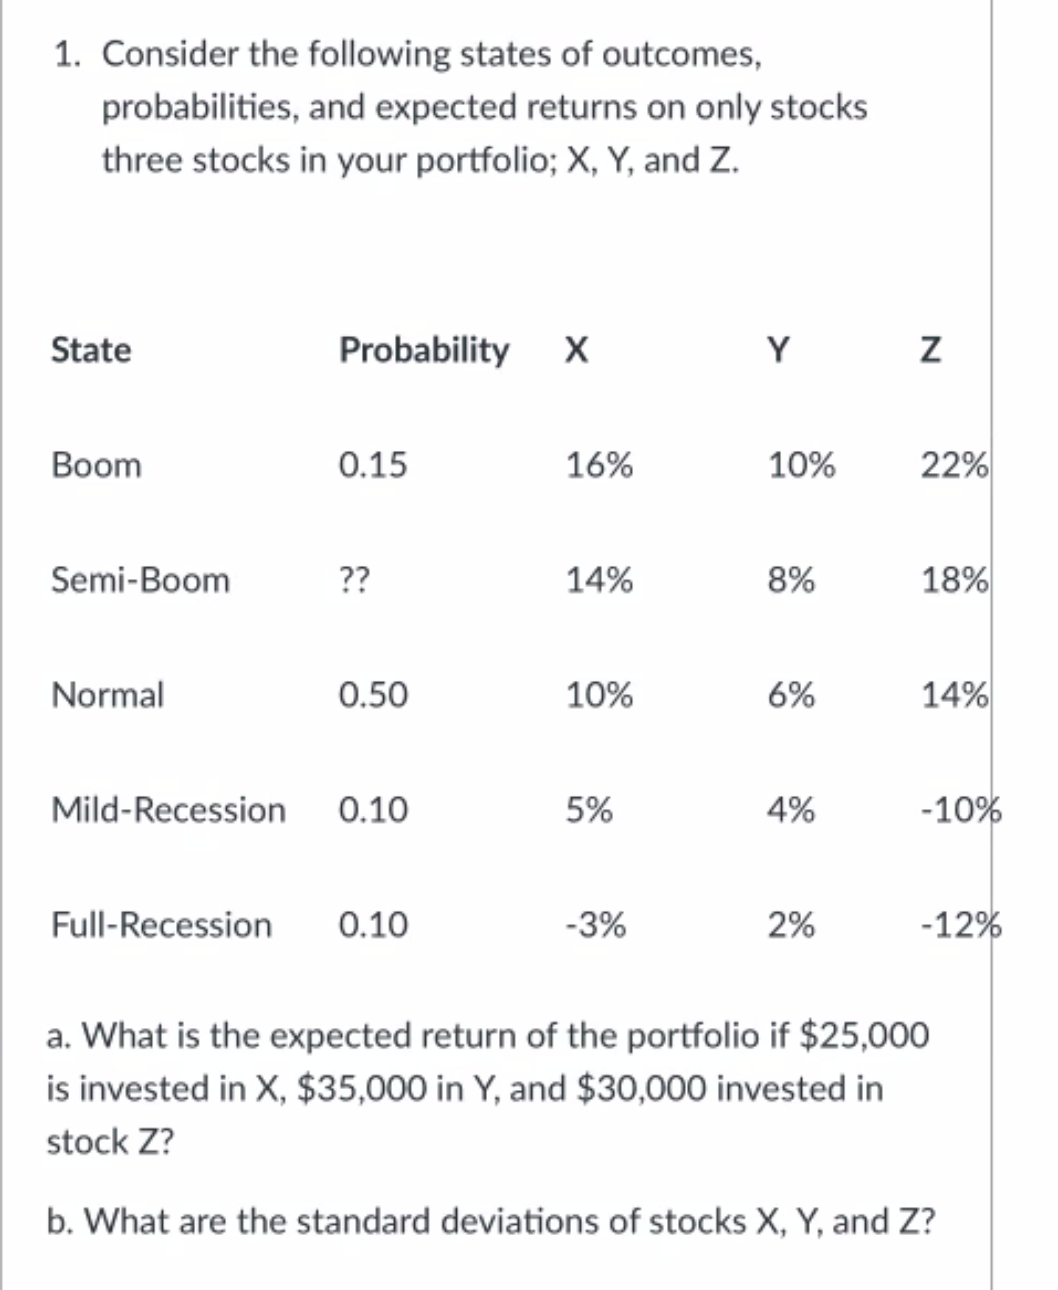 1. Consider the following states of outcomes,
probabilities, and expected returns on only stocks
three stocks in your portfolio; X, Y, and Z.
State
Probability X
Y
Boom
0.15
16%
10%
22%
Semi-Boom
??
14%
8%
18%
Normal
0.50
10%
6%
14%
Mild-Recession
0.10
5%
4%
-10%
Full-Recession
0.10
-3%
2%
-12%
a. What is the expected return of the portfolio if $25,000
is invested in X, $35,000 in Y, and $30,000 invested in
stock Z?
b. What are the standard deviations of stocks X, Y, and Z?
